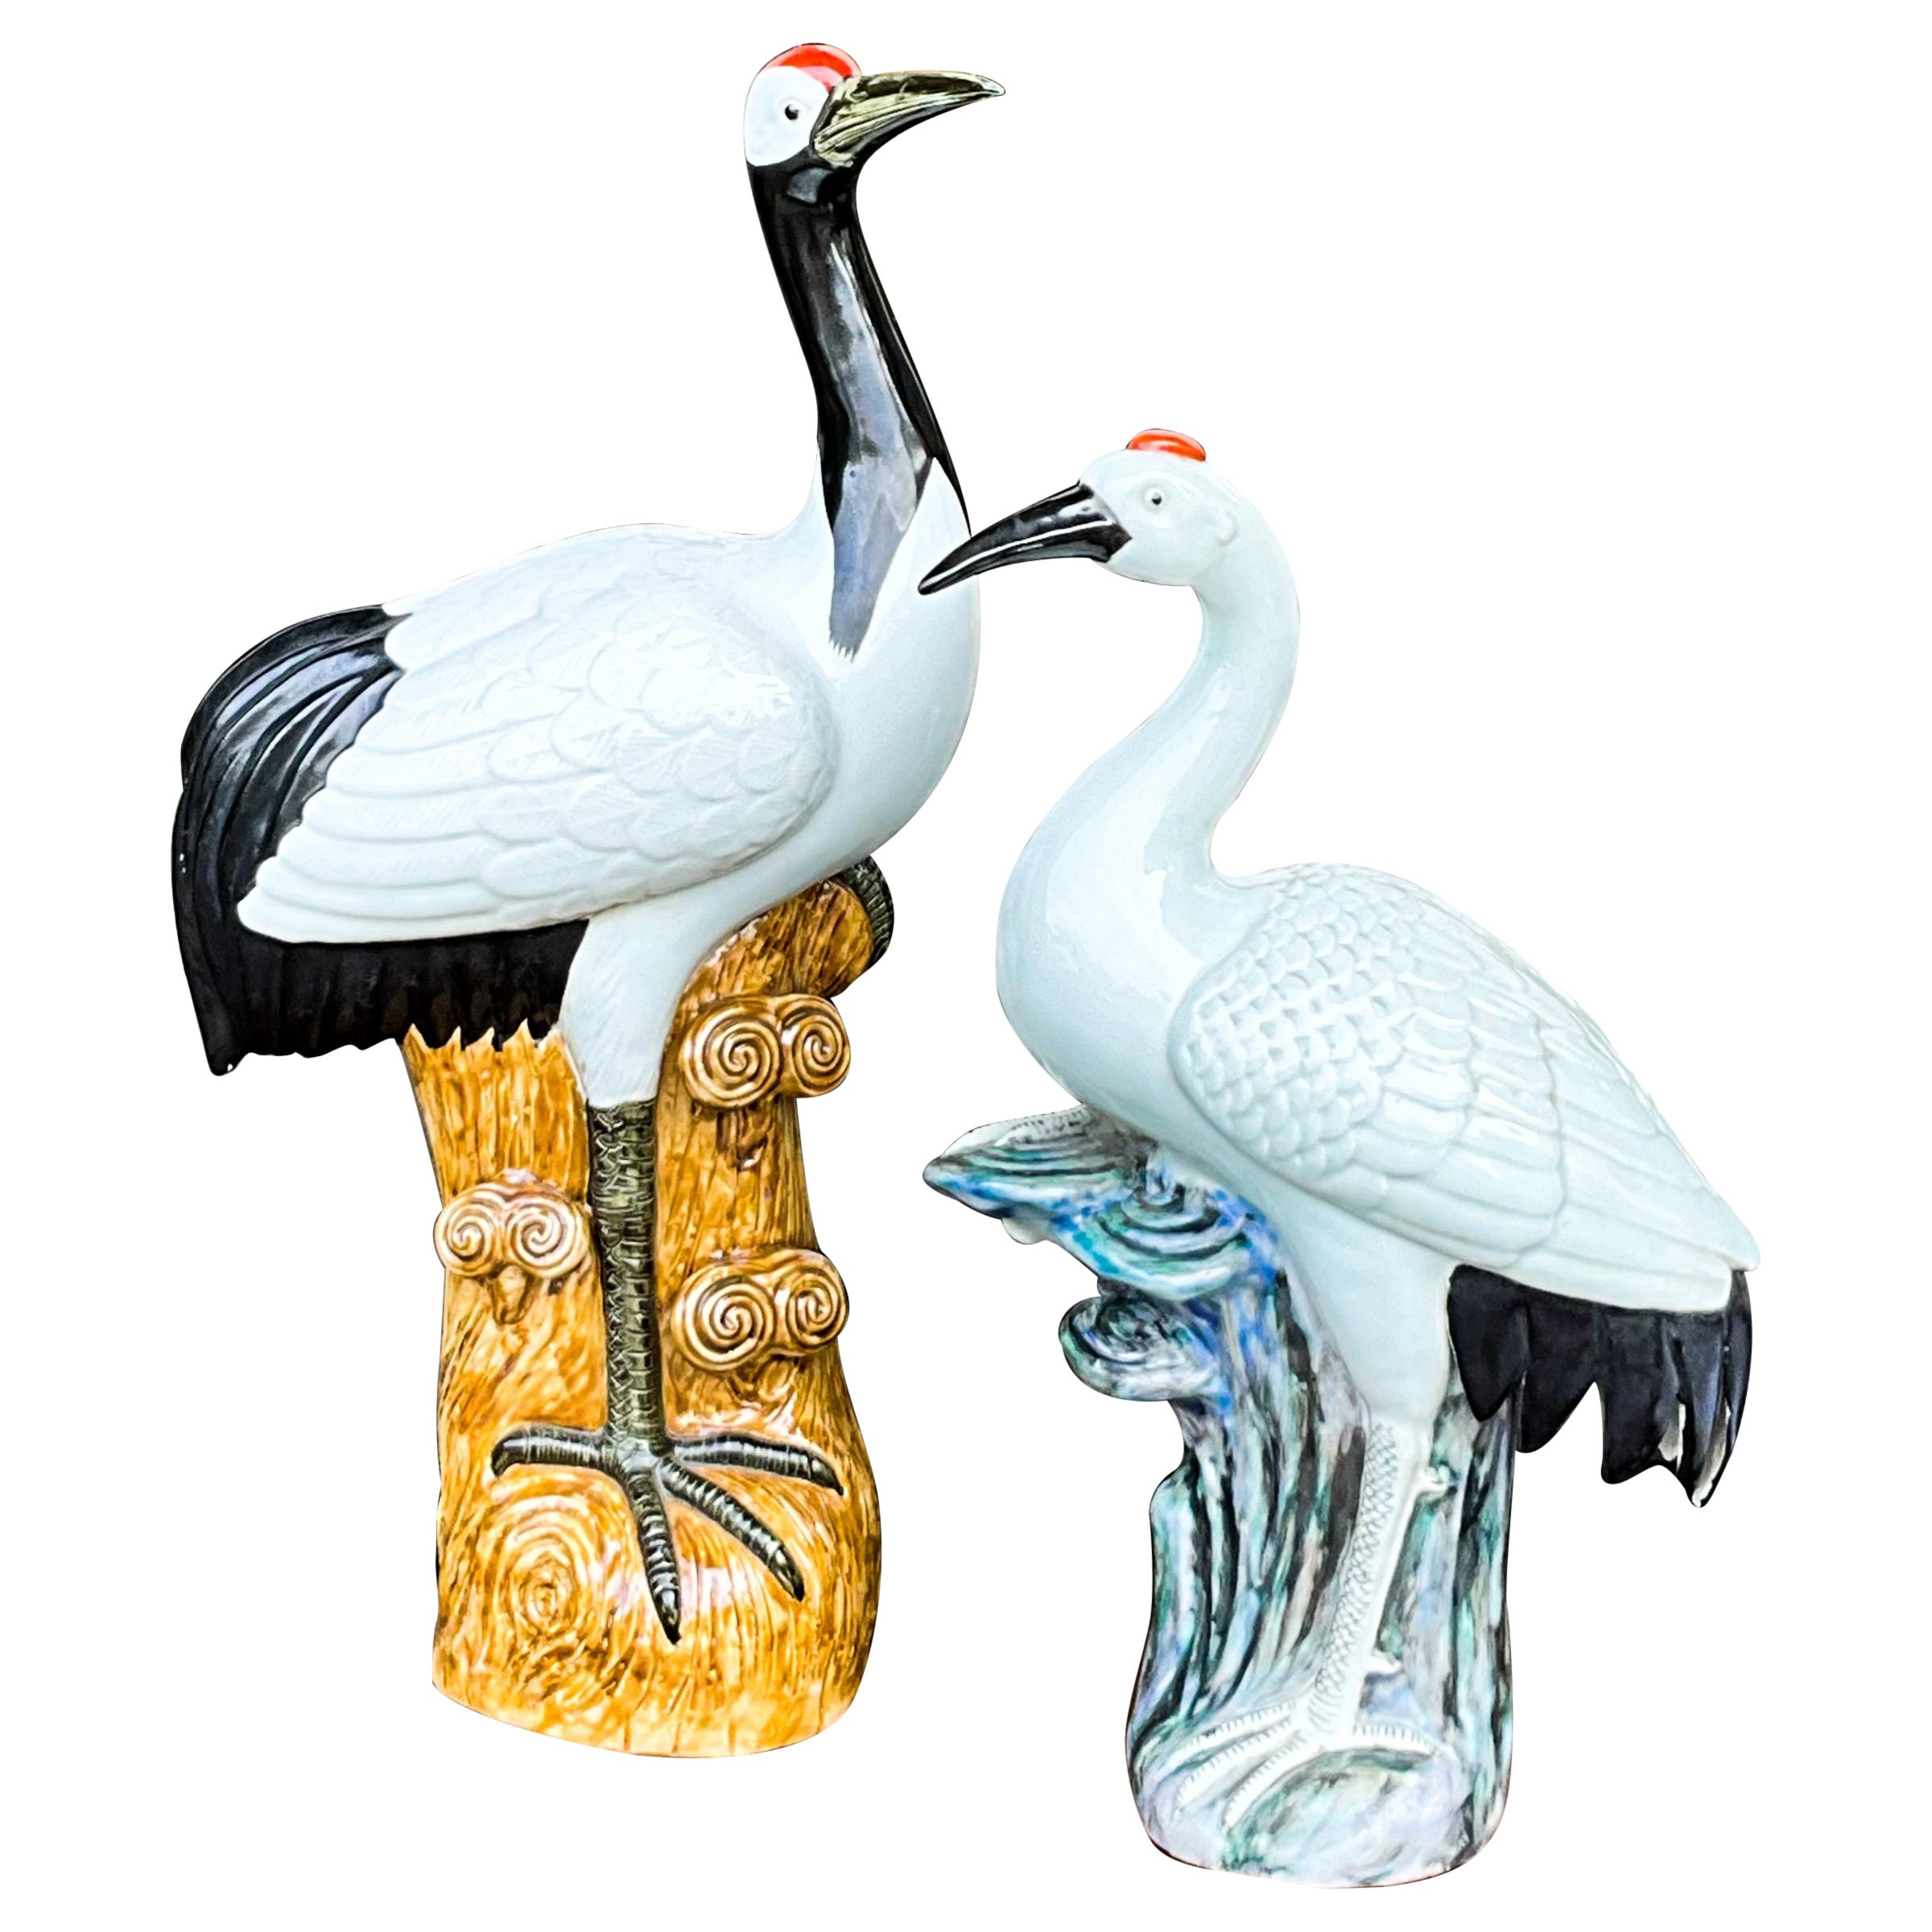 Chinese Export Style Pottery Coastal Beach Cranes / Birds Figurines, S/2 For Sale